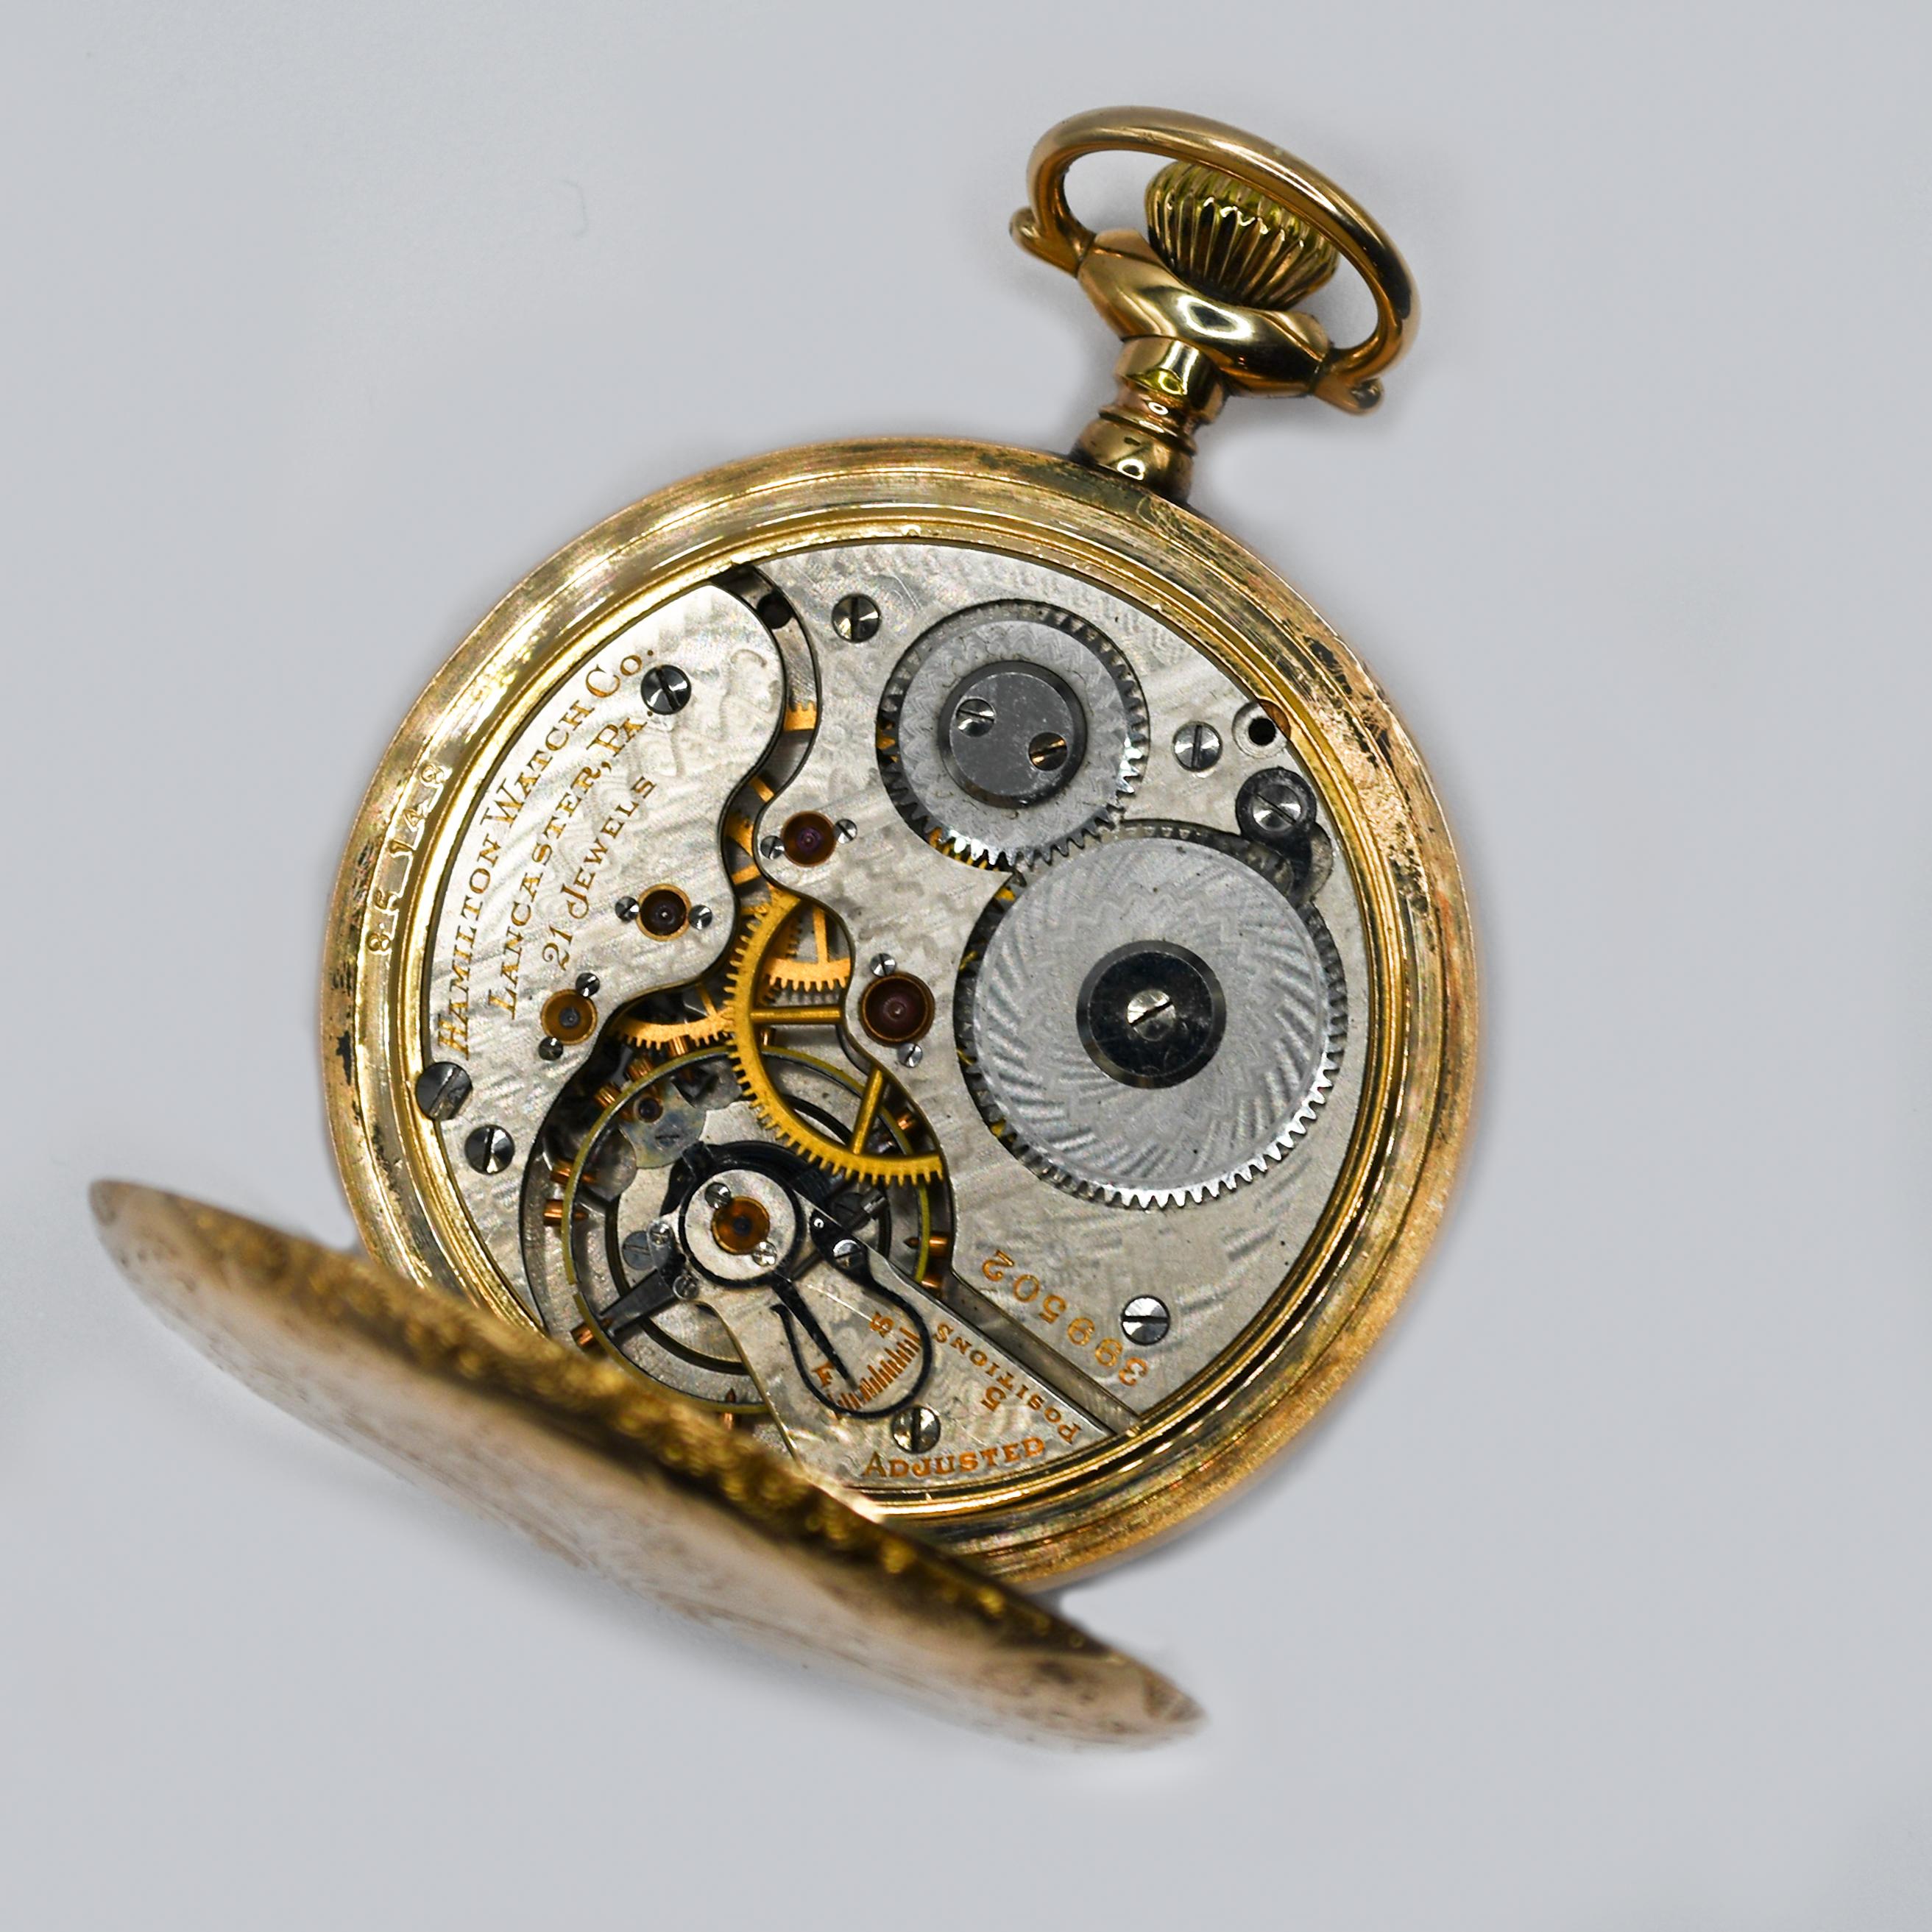 Hamilton Gold Filled Pocket Watch, 21 jewels, Size 16 For Sale 2